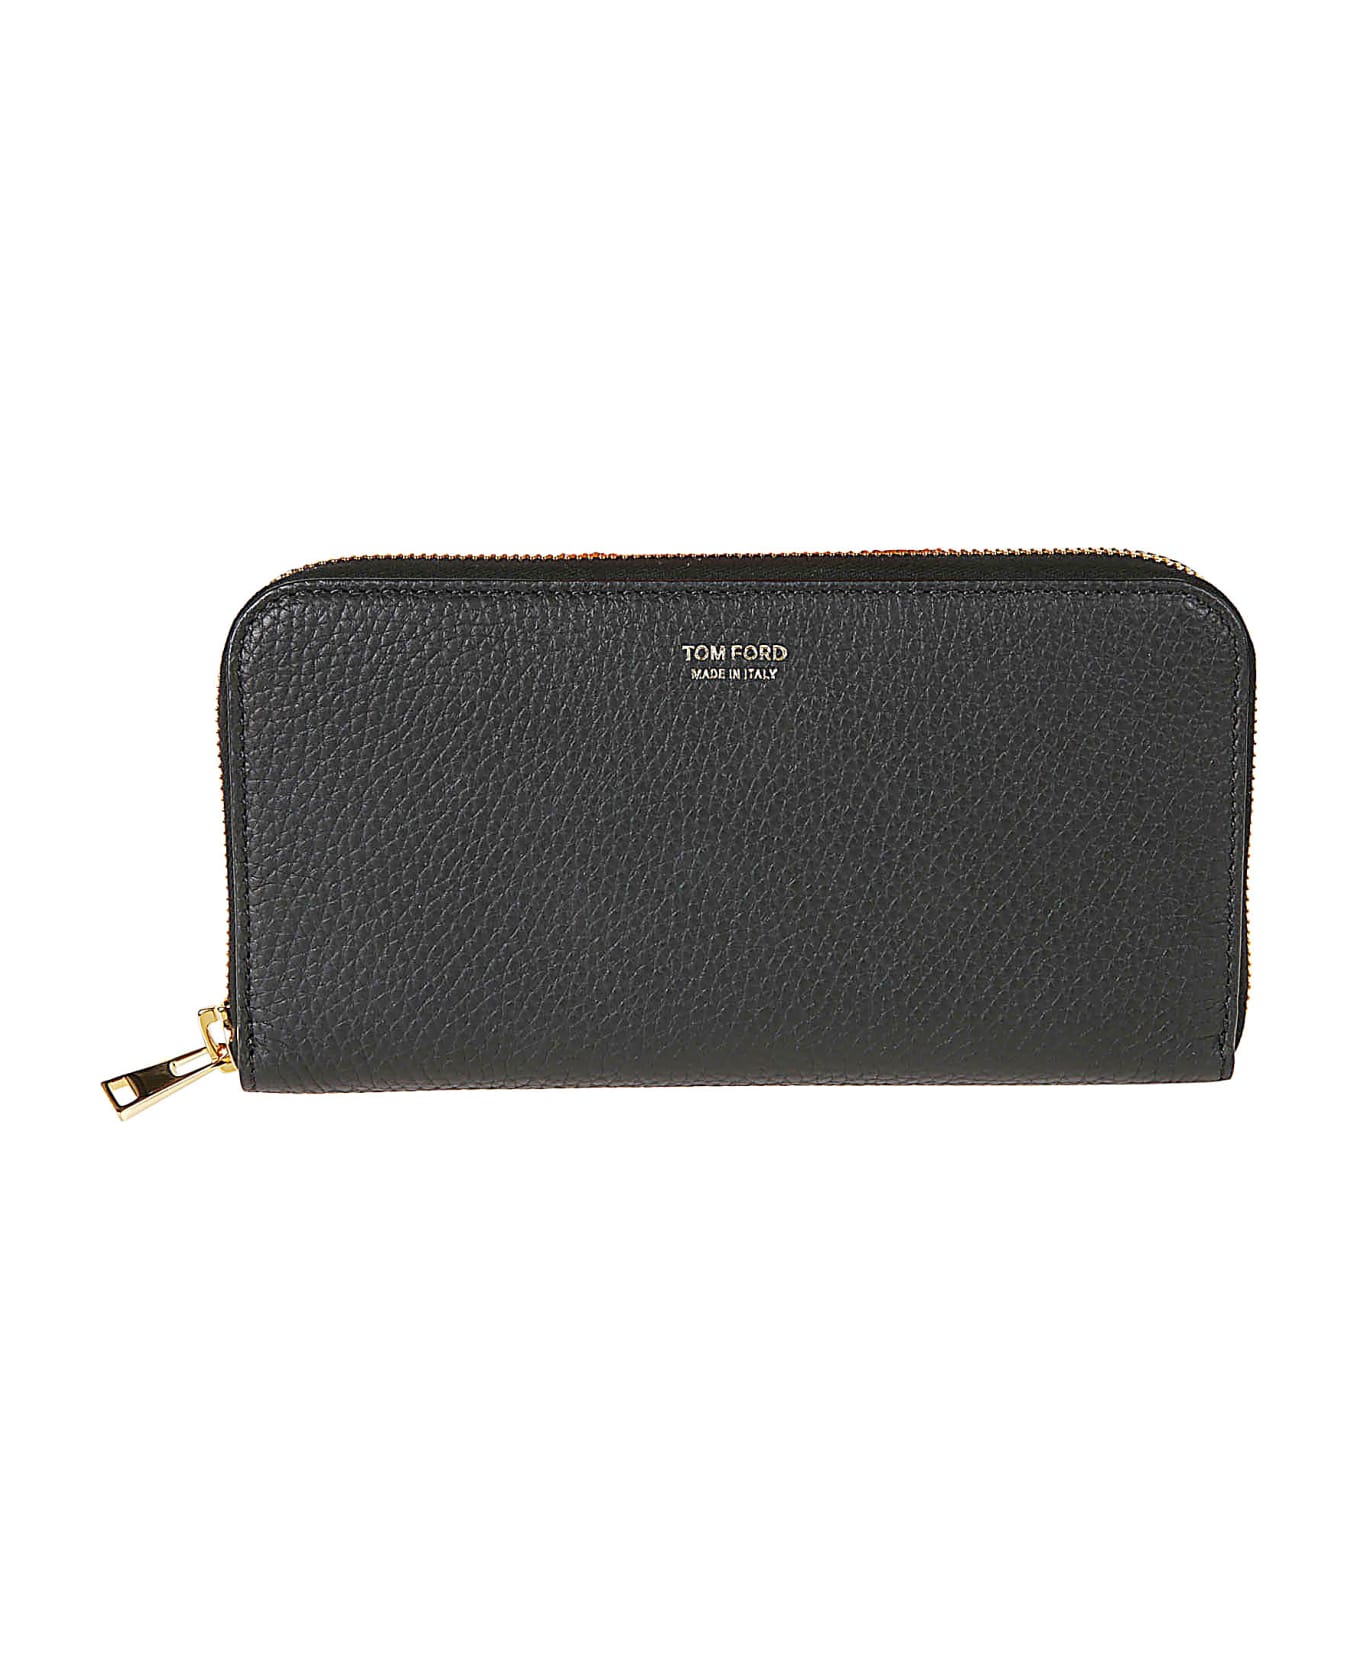 Tom Ford Grained Leather Zip-around Wallet - Black